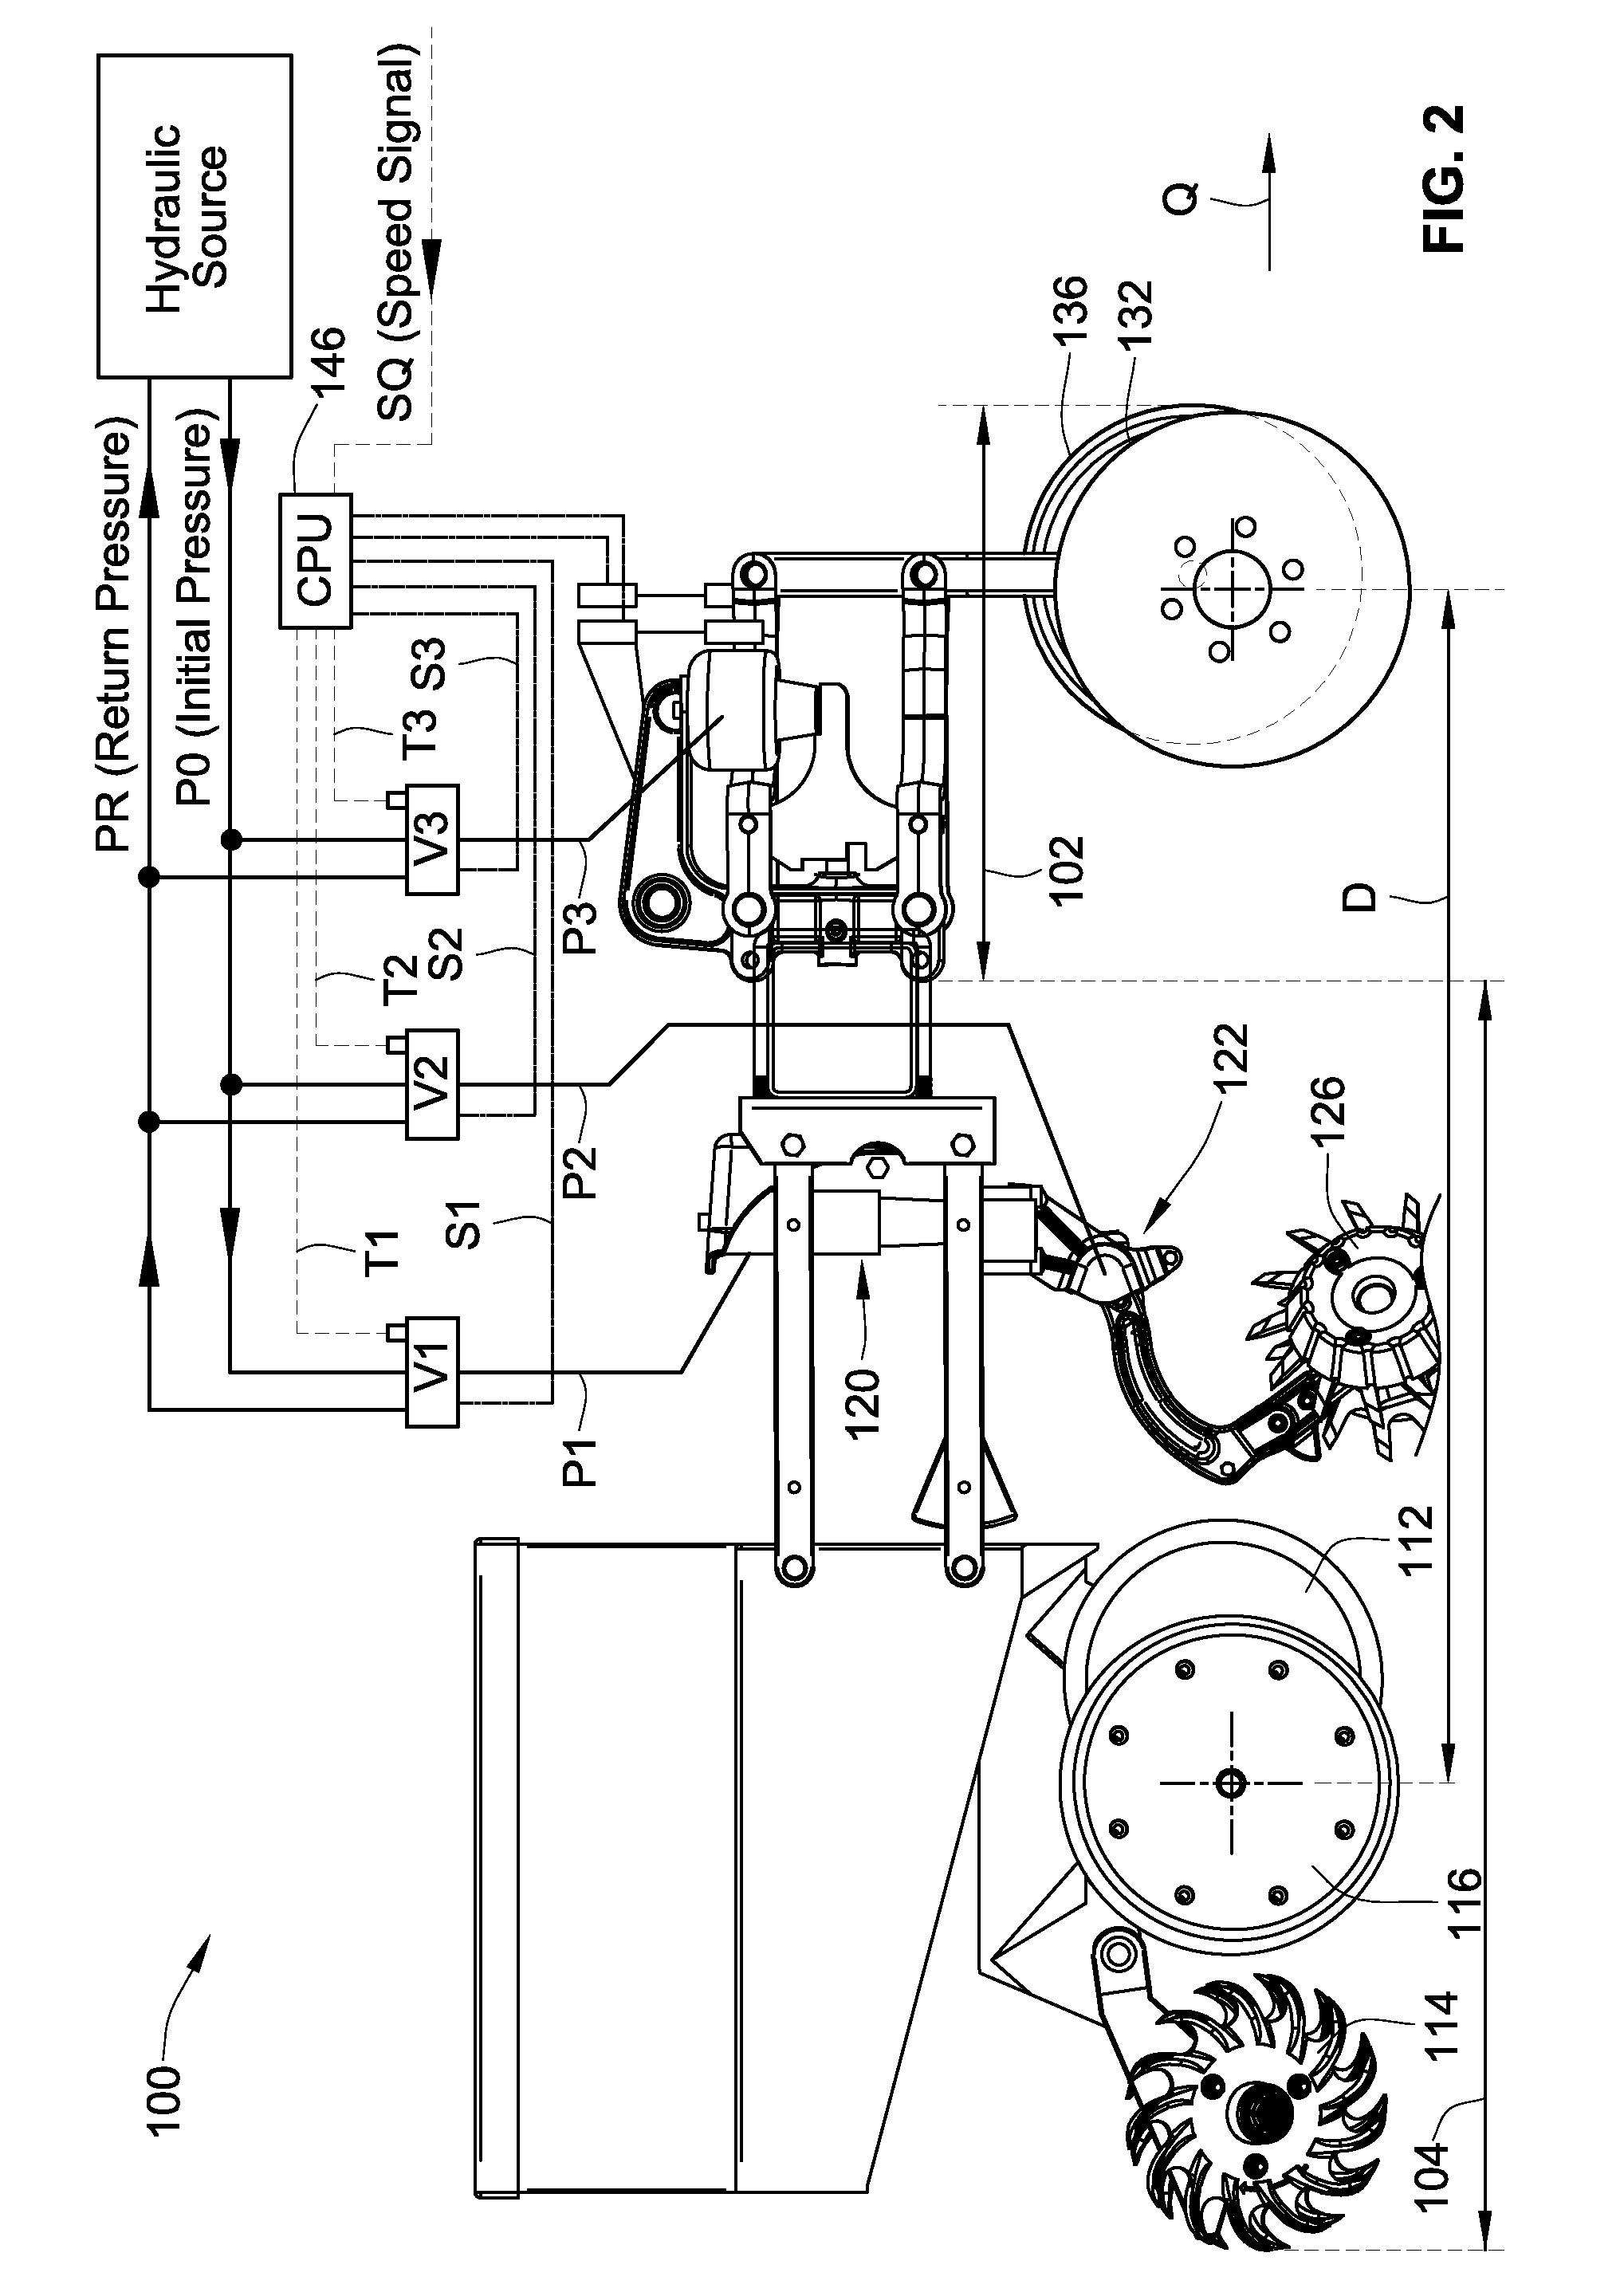 Agricultural apparatus for sensing and providing feedback of soil property changes in real time